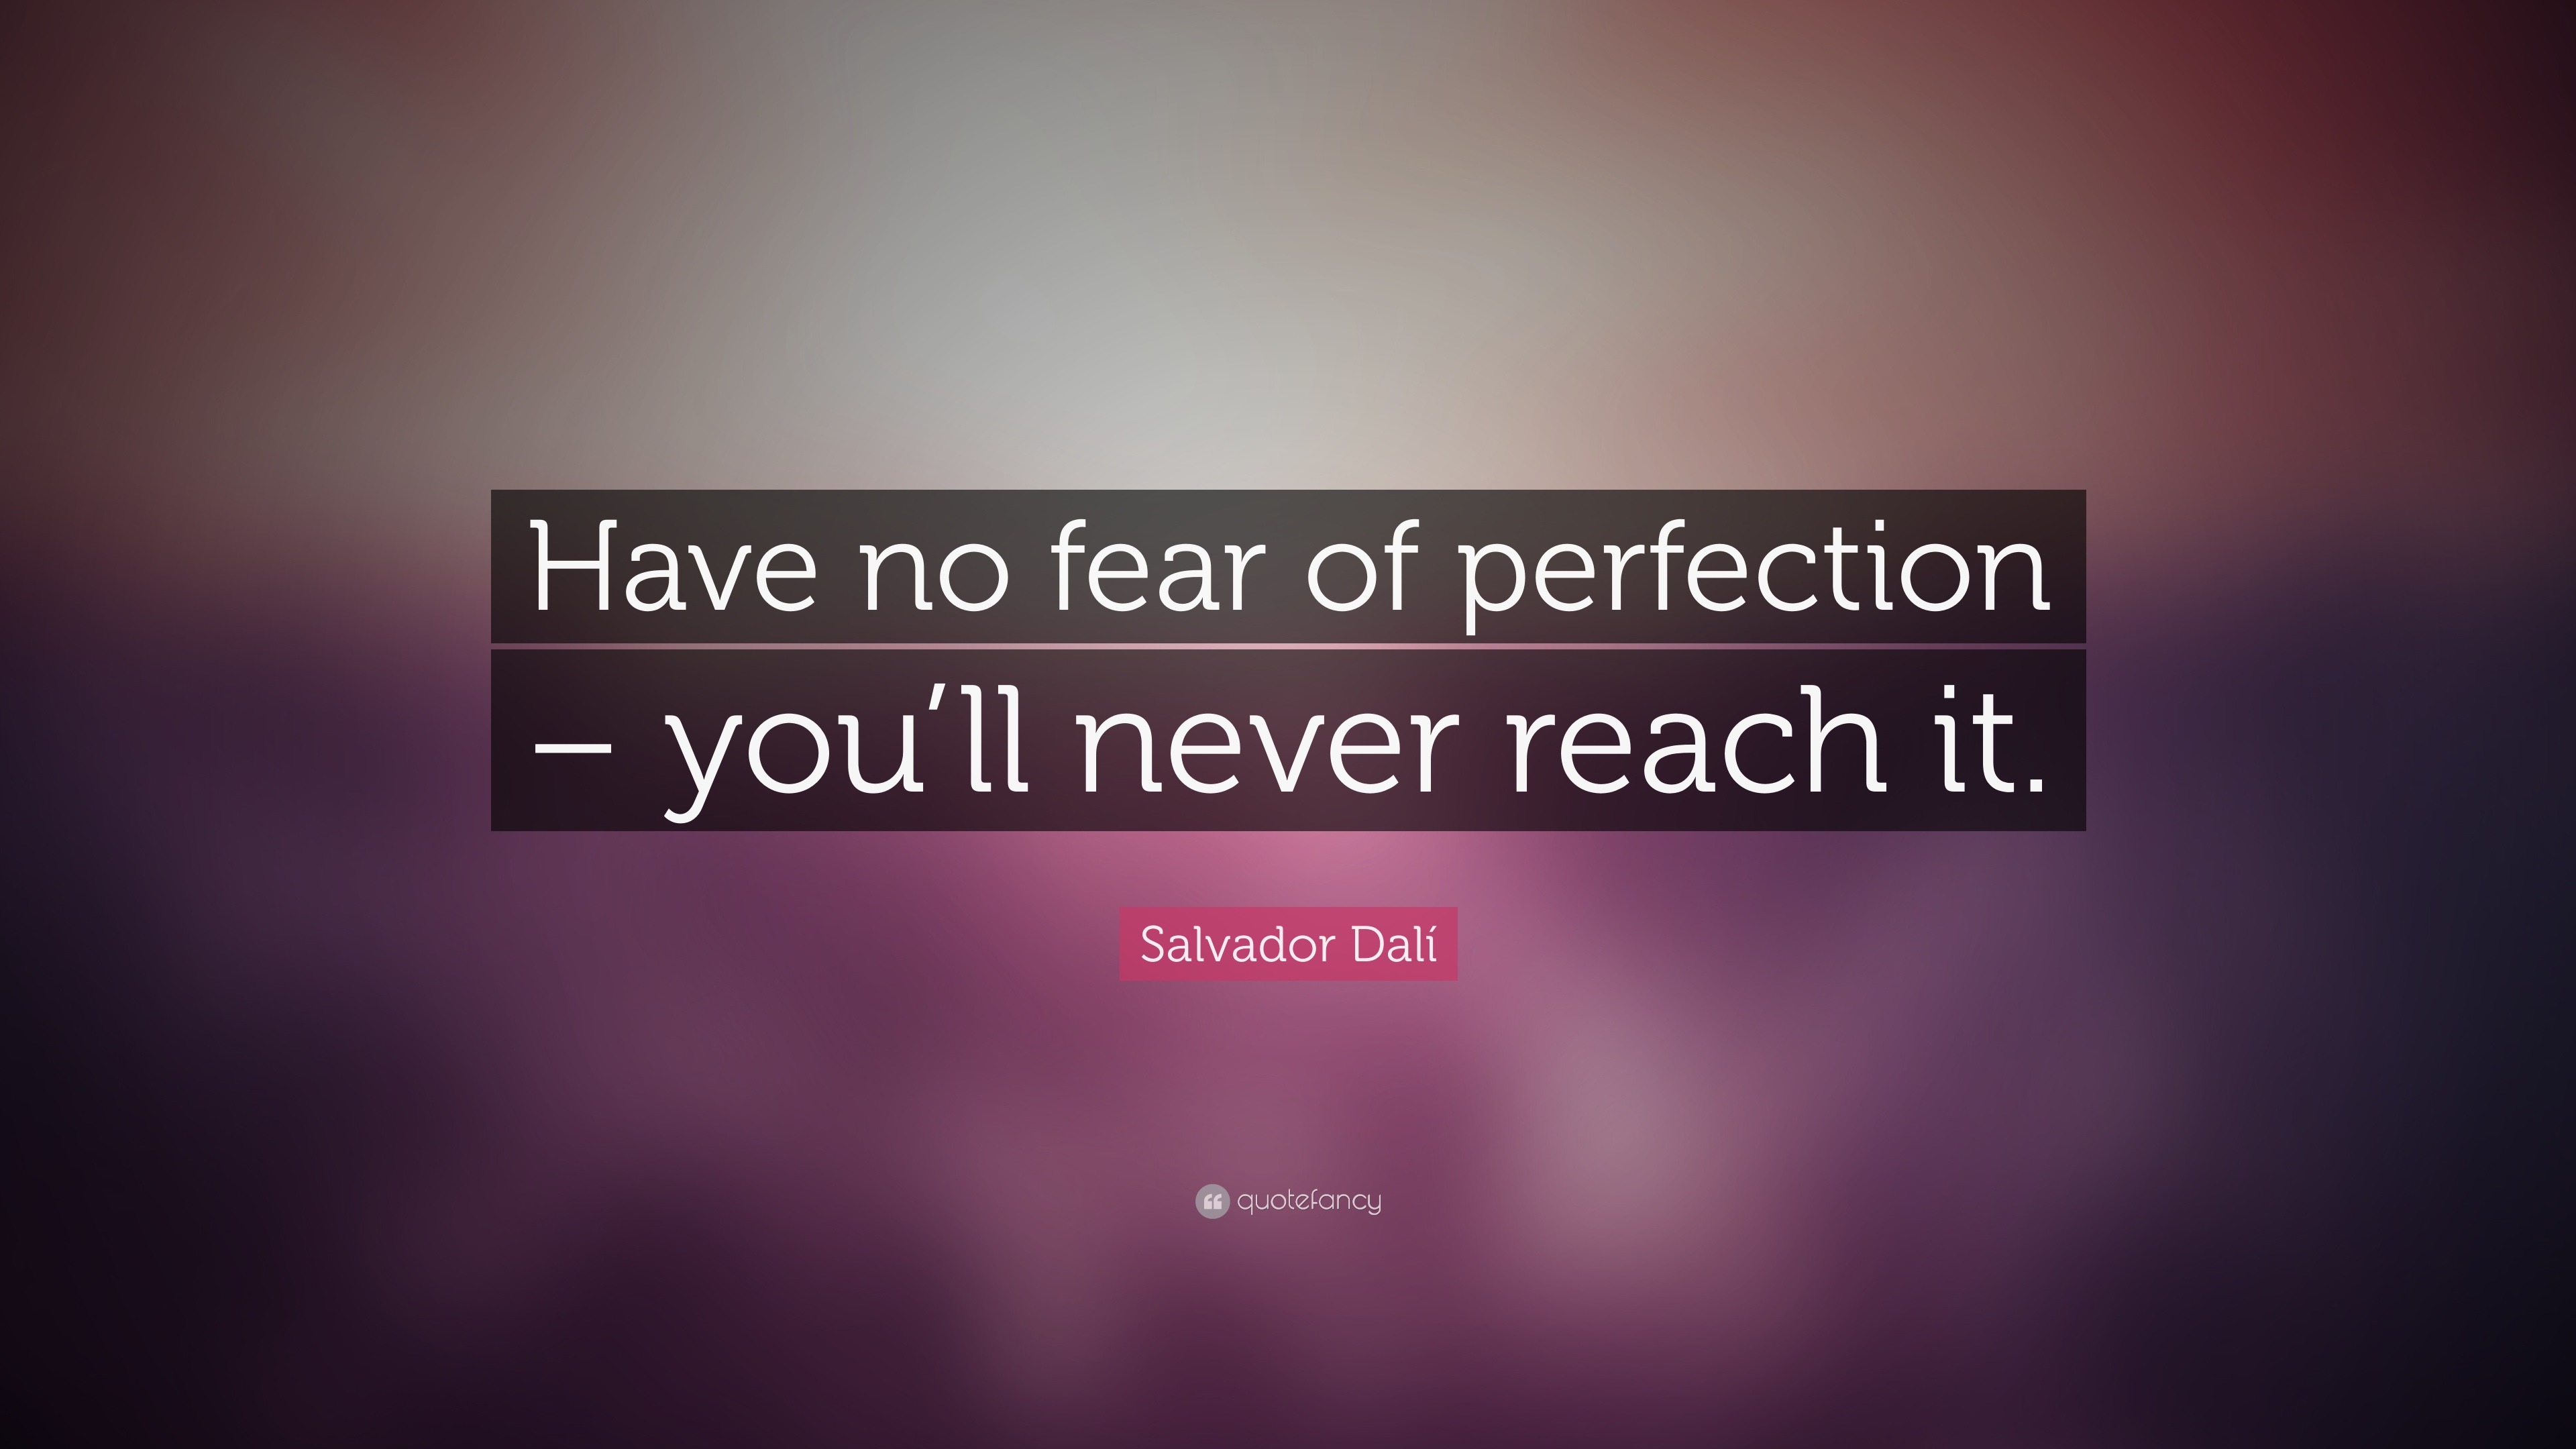 Salvador Dalí Quote: “Have no fear of perfection – you’ll never reach it.”